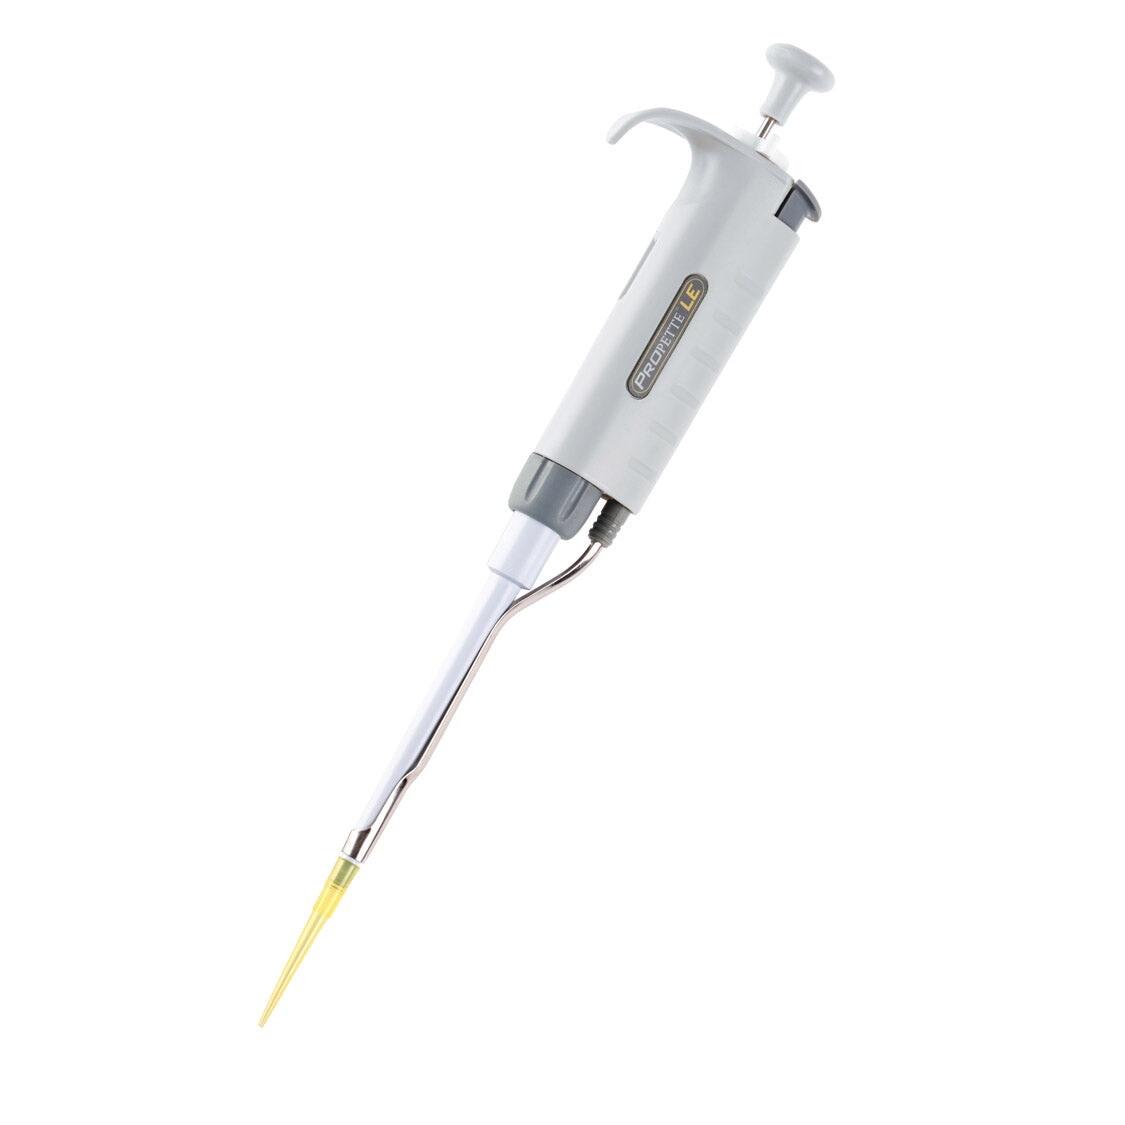 MTC Bio P5200-5M ProPette LE Single Channel Pipette, 1 to 5mL (does not come with ejector)